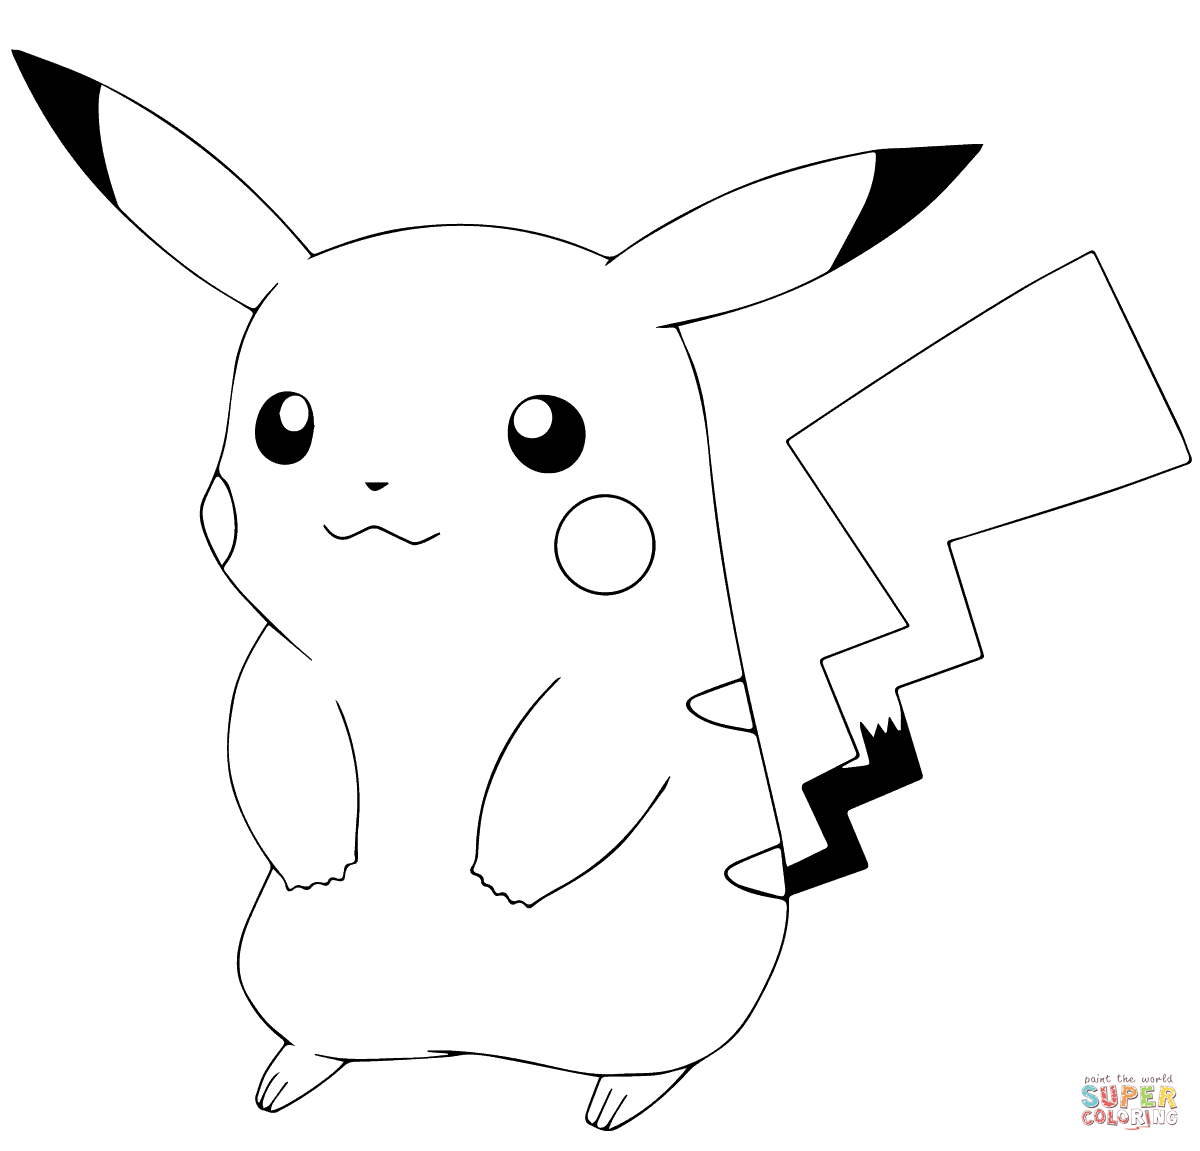 Pokémon GO Pikachu coloring page | Free Printable Coloring Pages